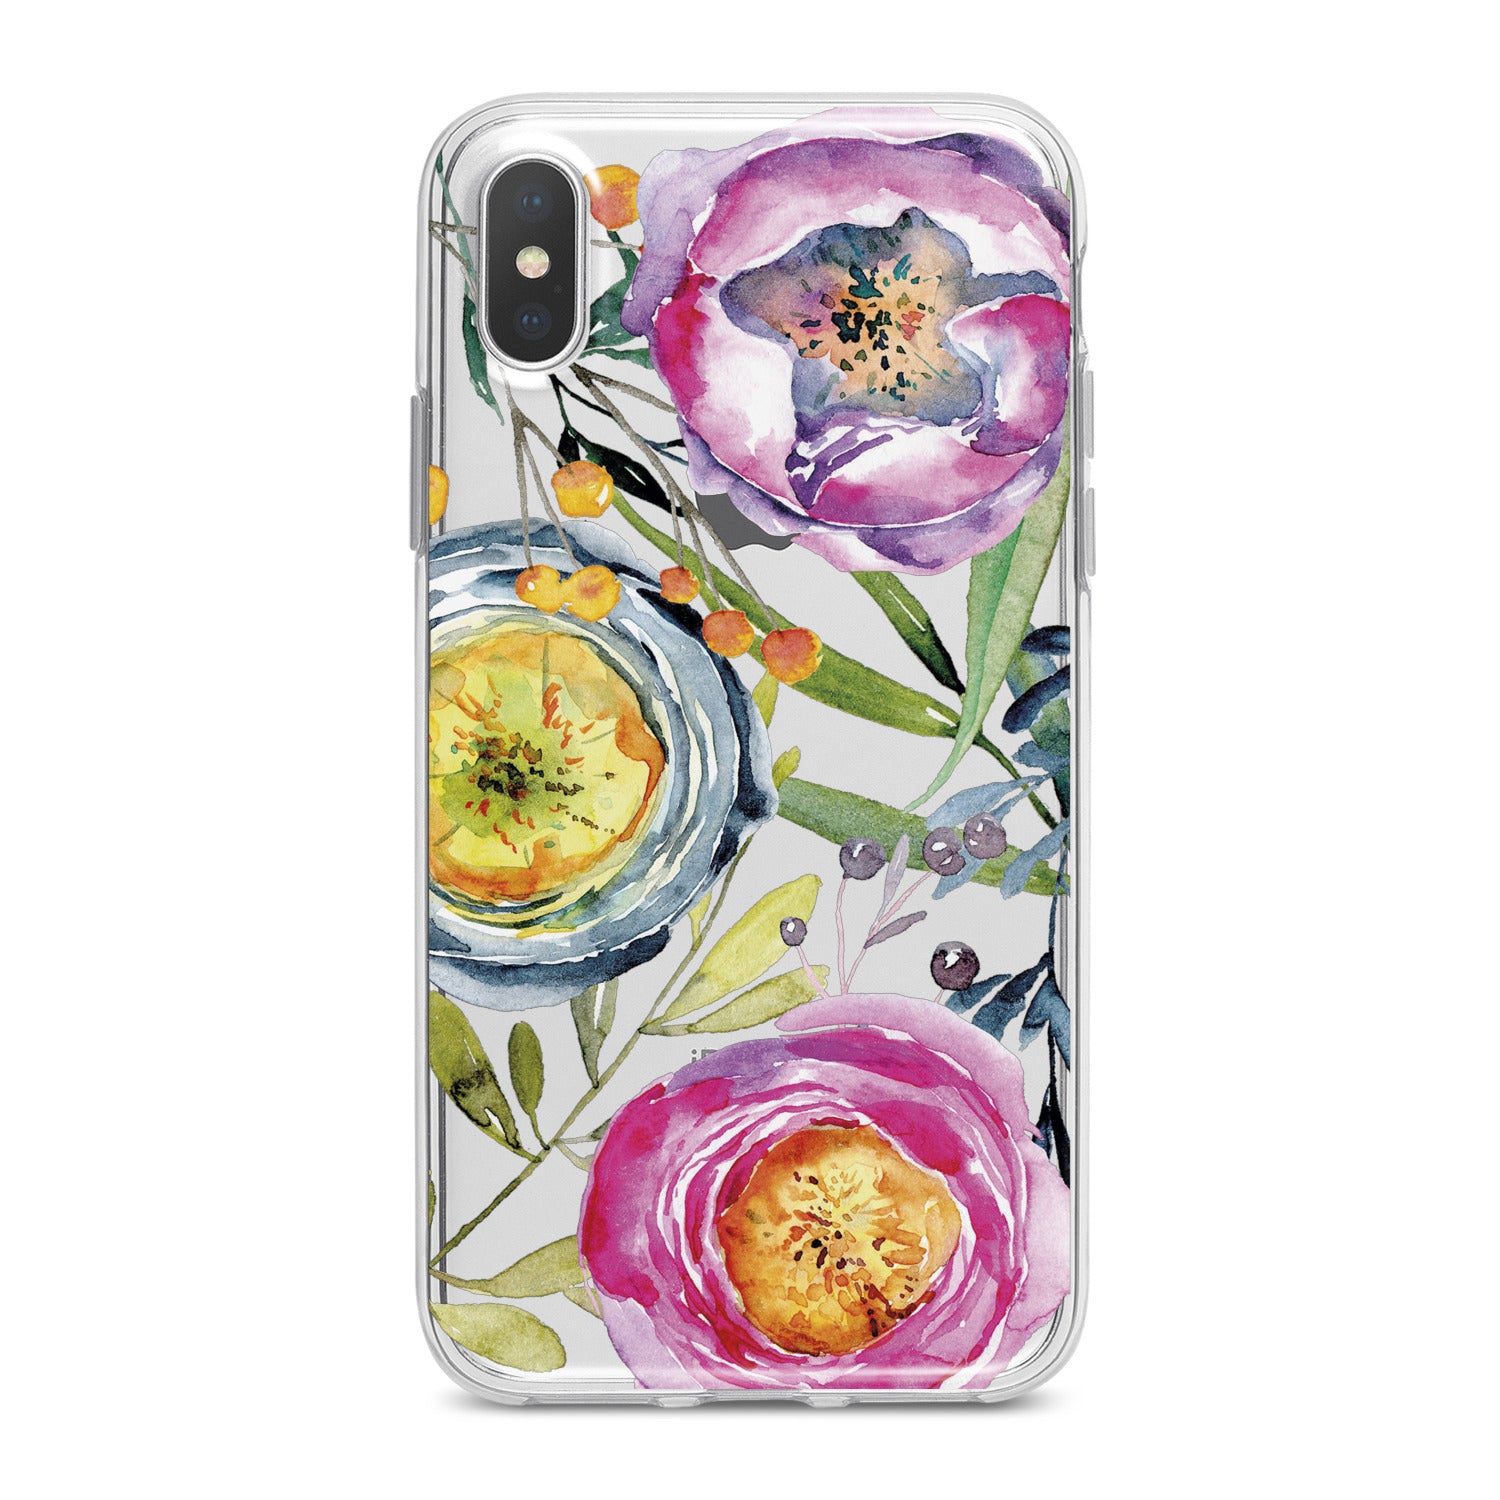 Lex Altern Colorful Tea Rose Phone Case for your iPhone & Android phone.